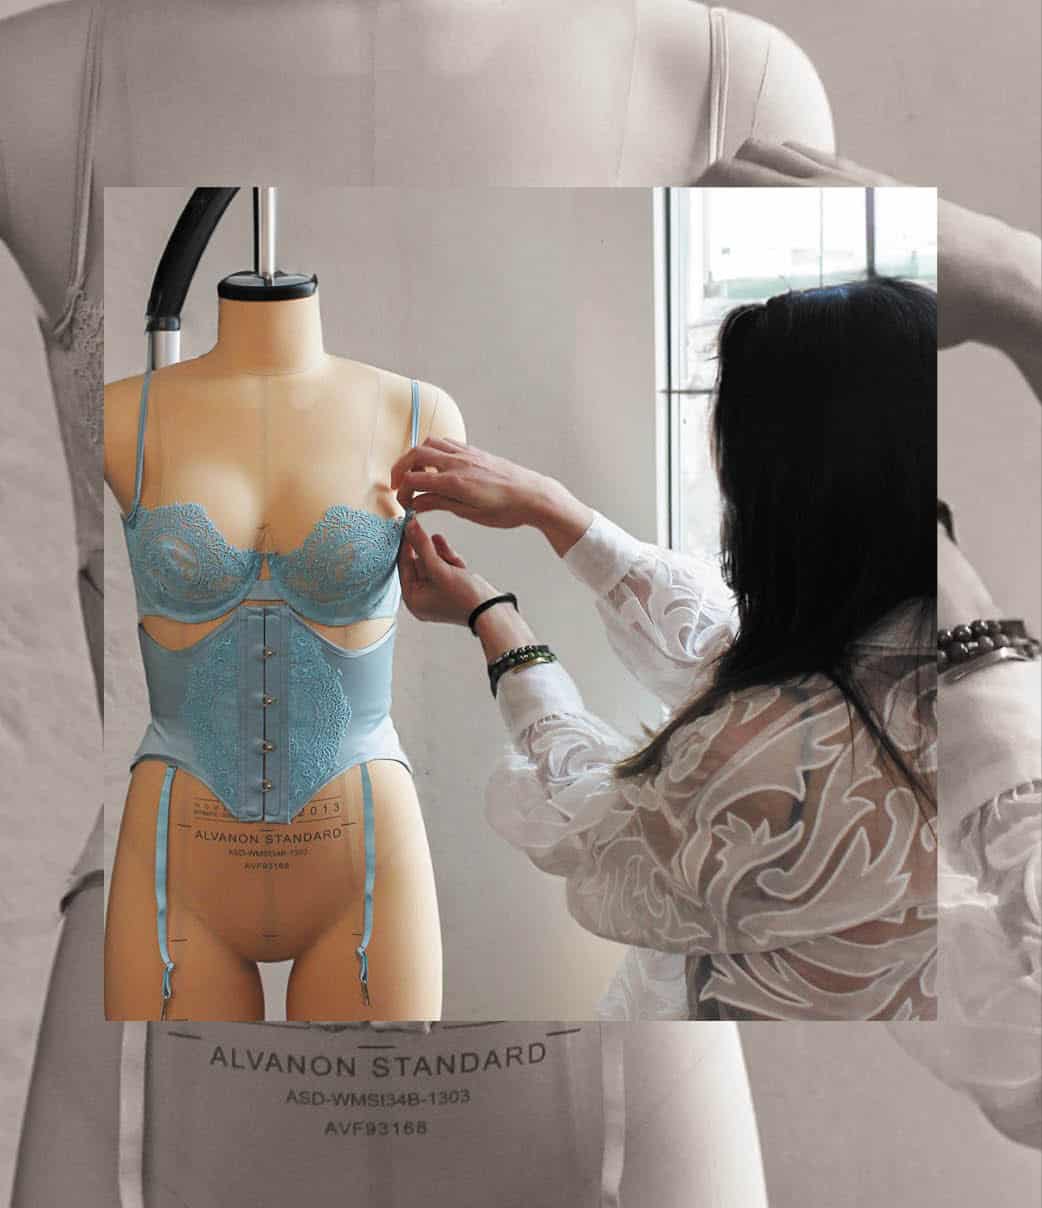 Lingerie manufacturing